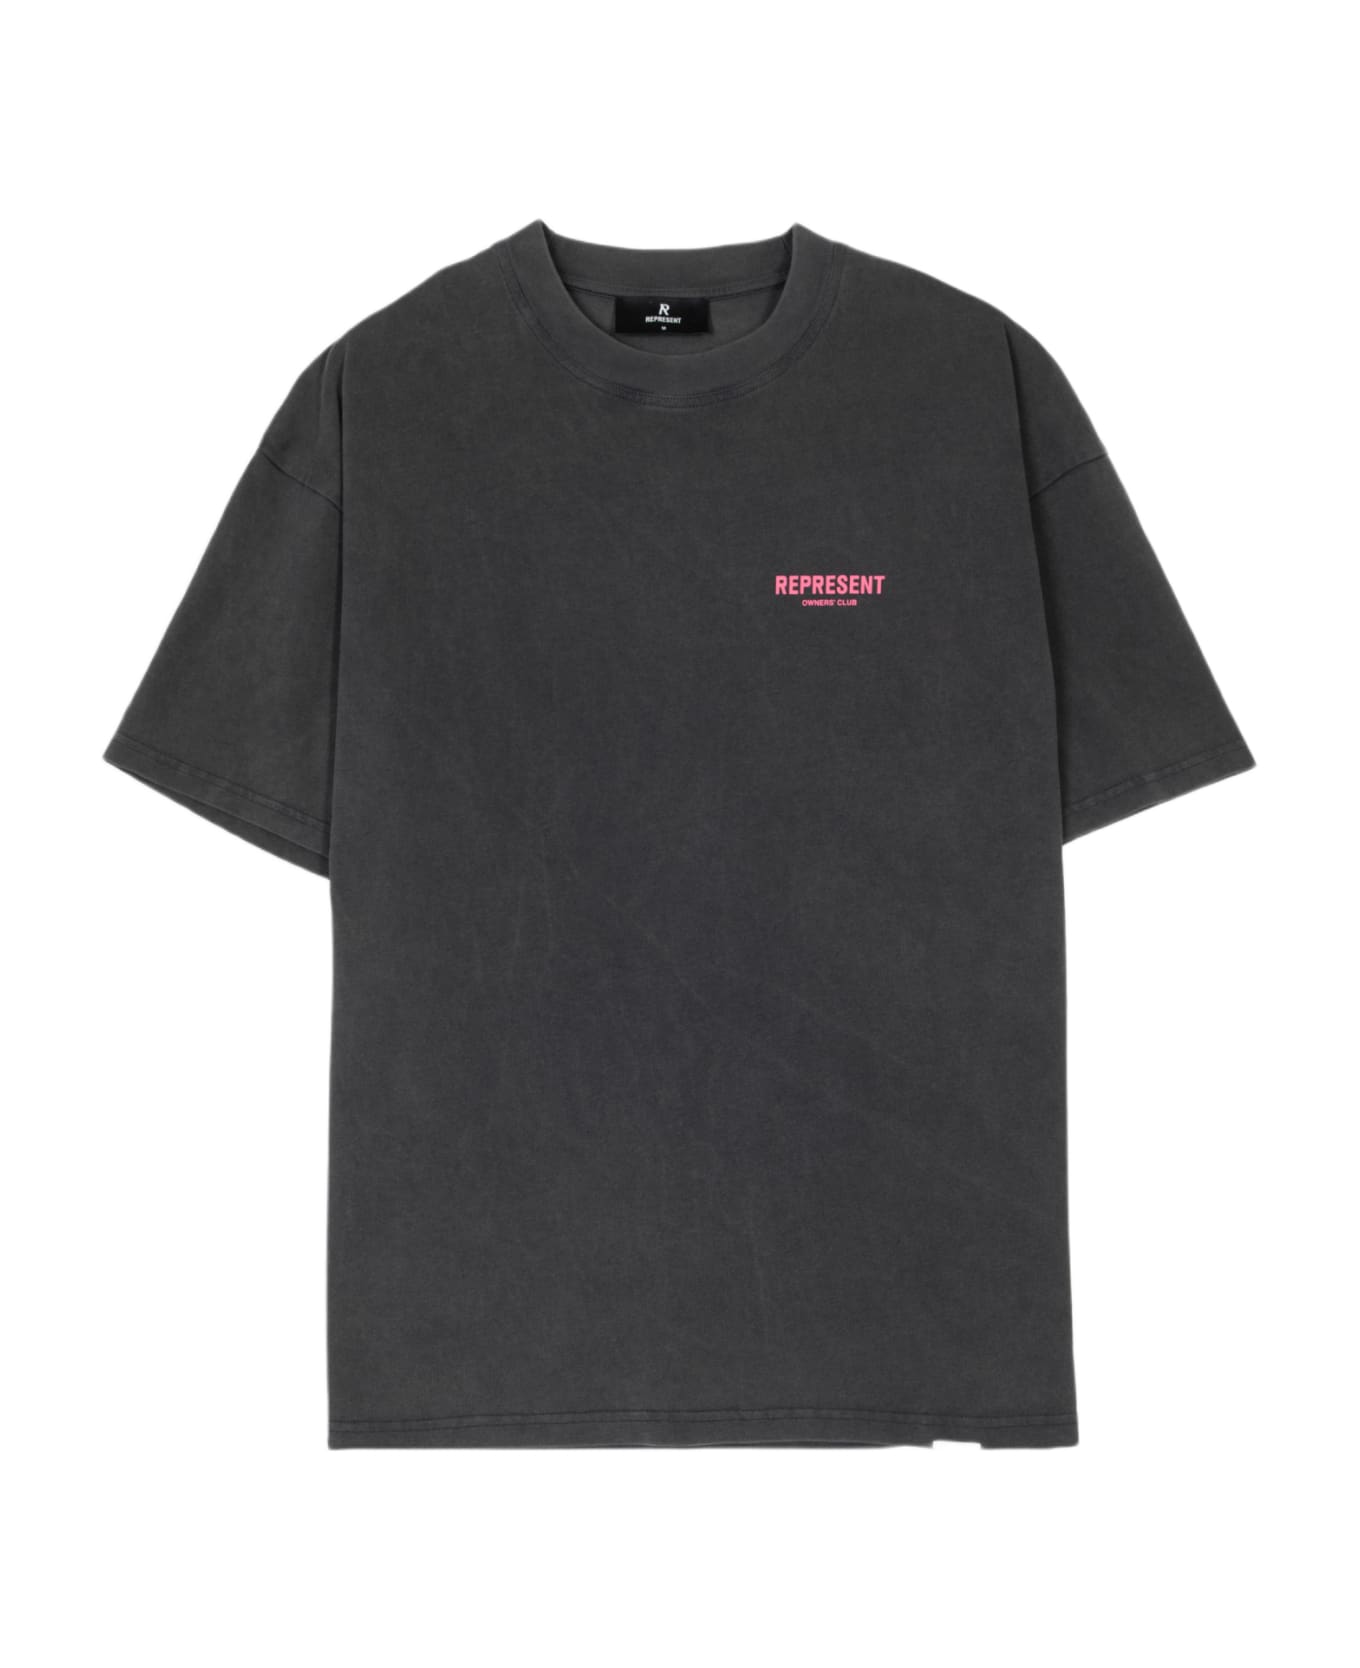 REPRESENT Owners Club T-shirt Vintage grey t-shirt with logo - Owners Club T-shirt - Grigio/rosa シャツ